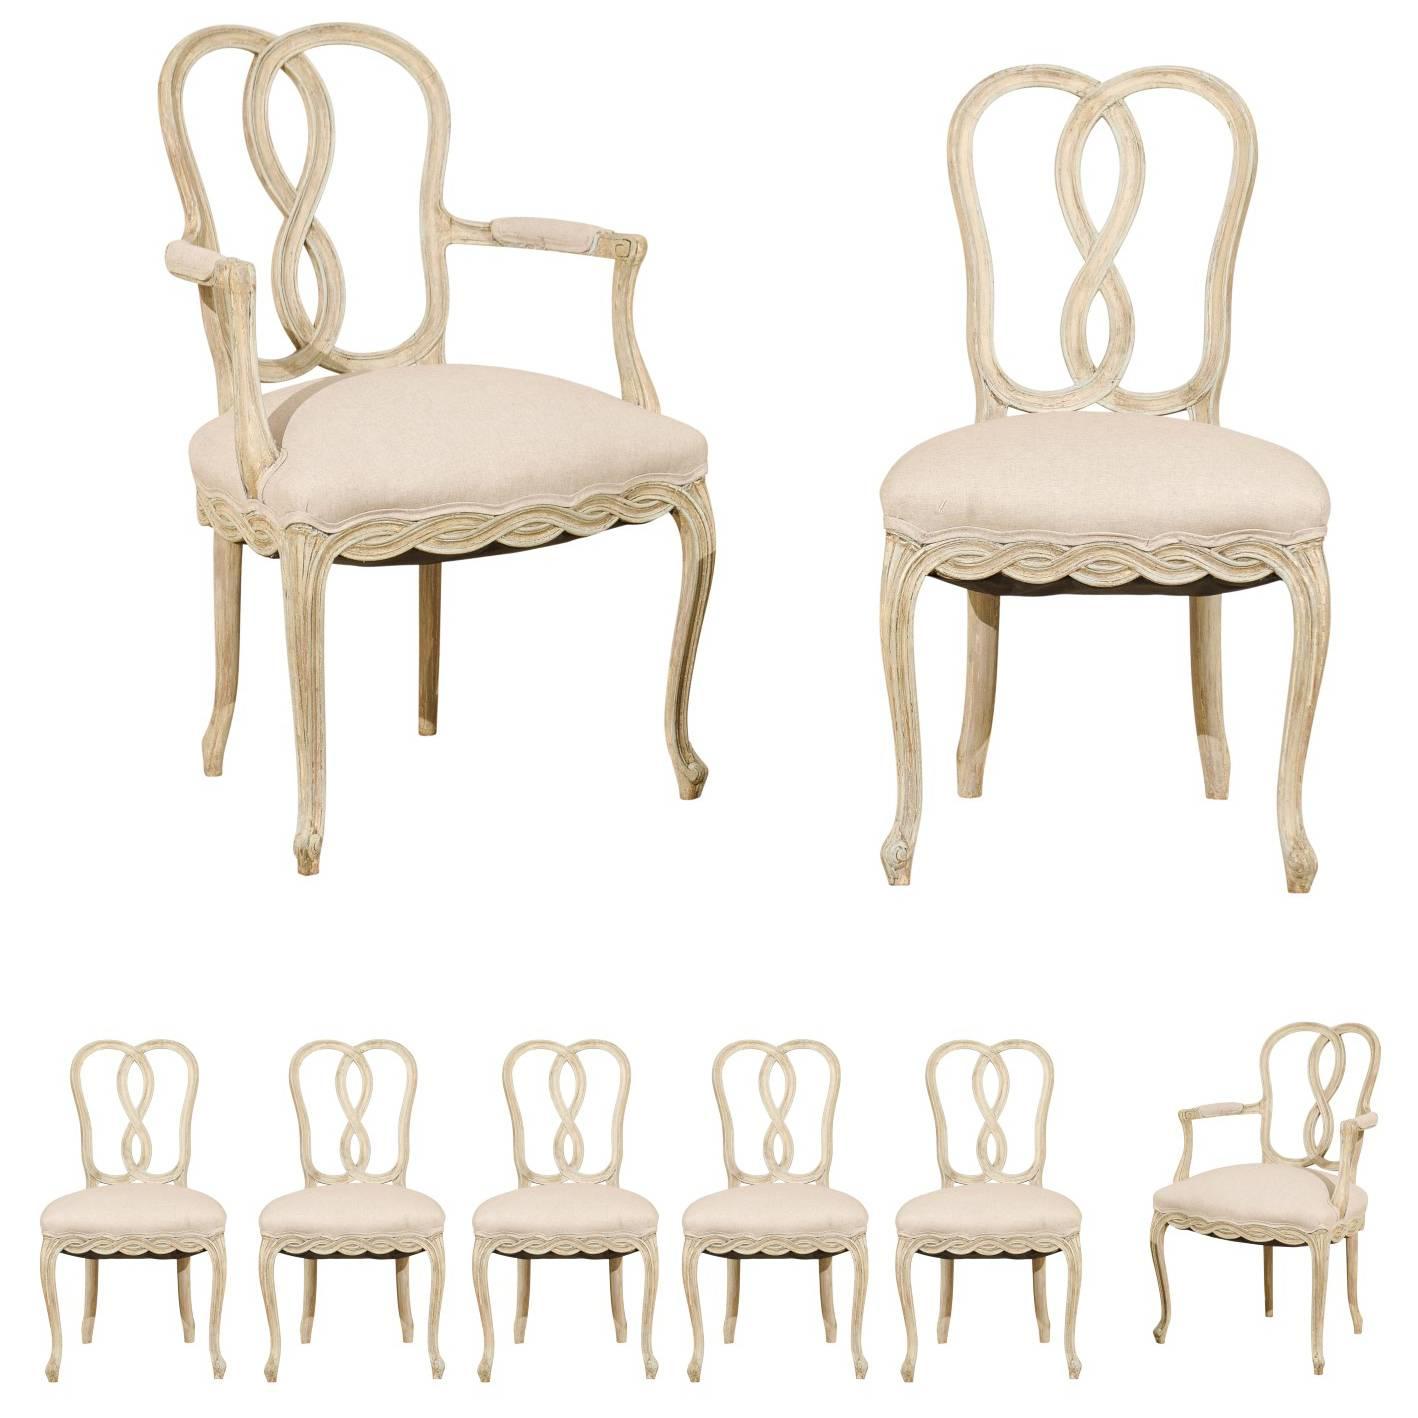 Set of Eight Italian Venetian Style Painted Wood Chairs with Ribbon Motifs